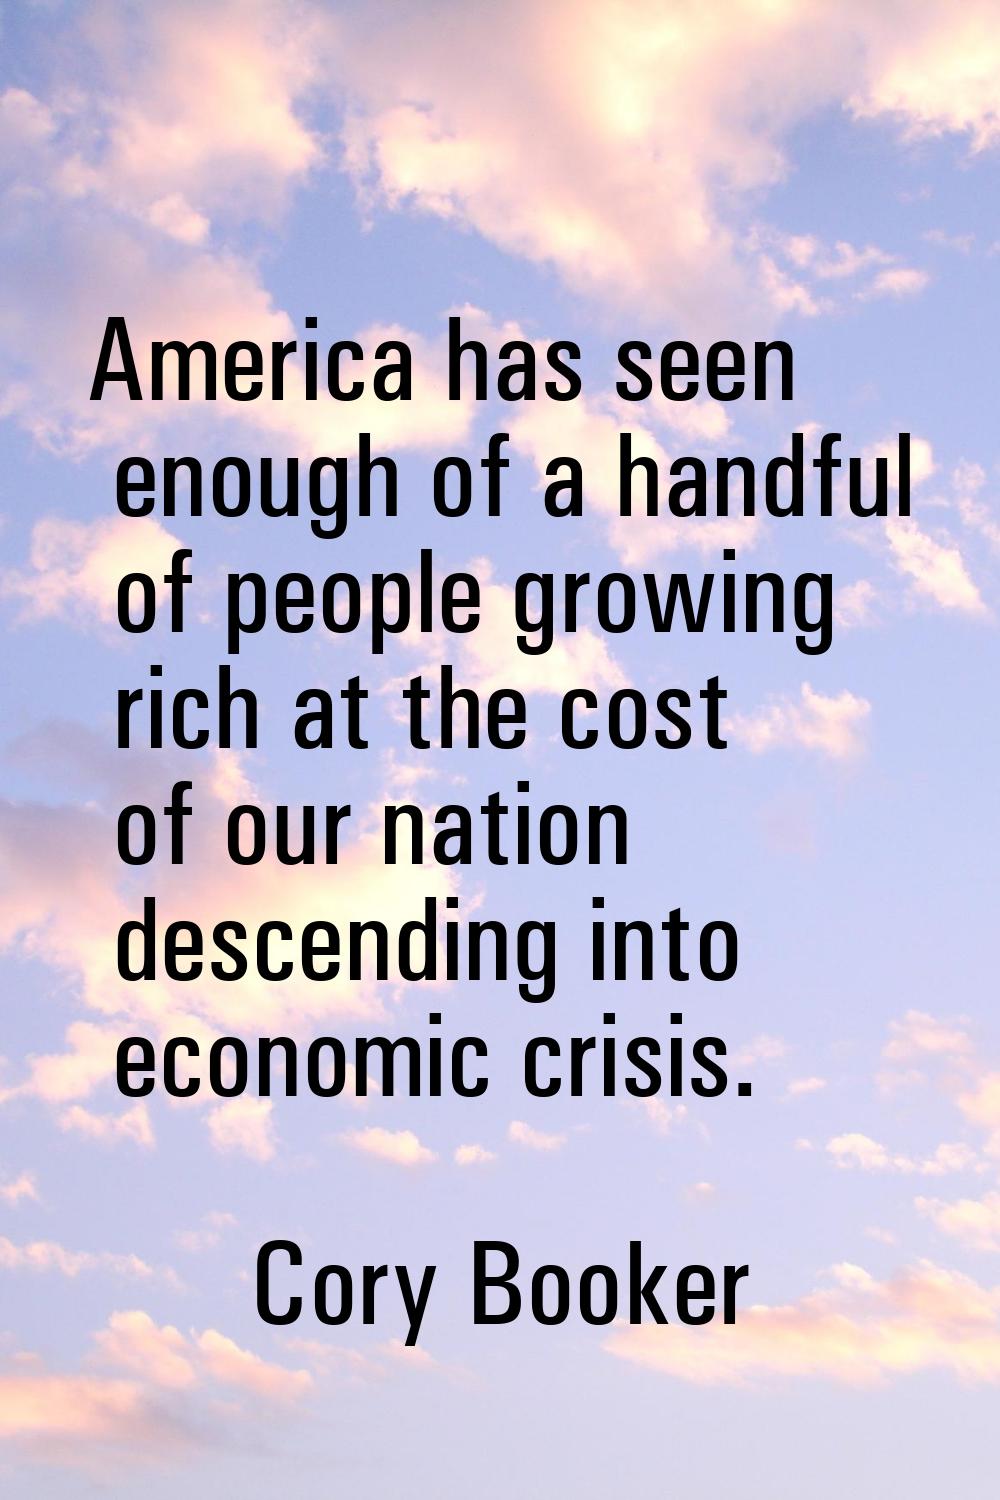 America has seen enough of a handful of people growing rich at the cost of our nation descending in